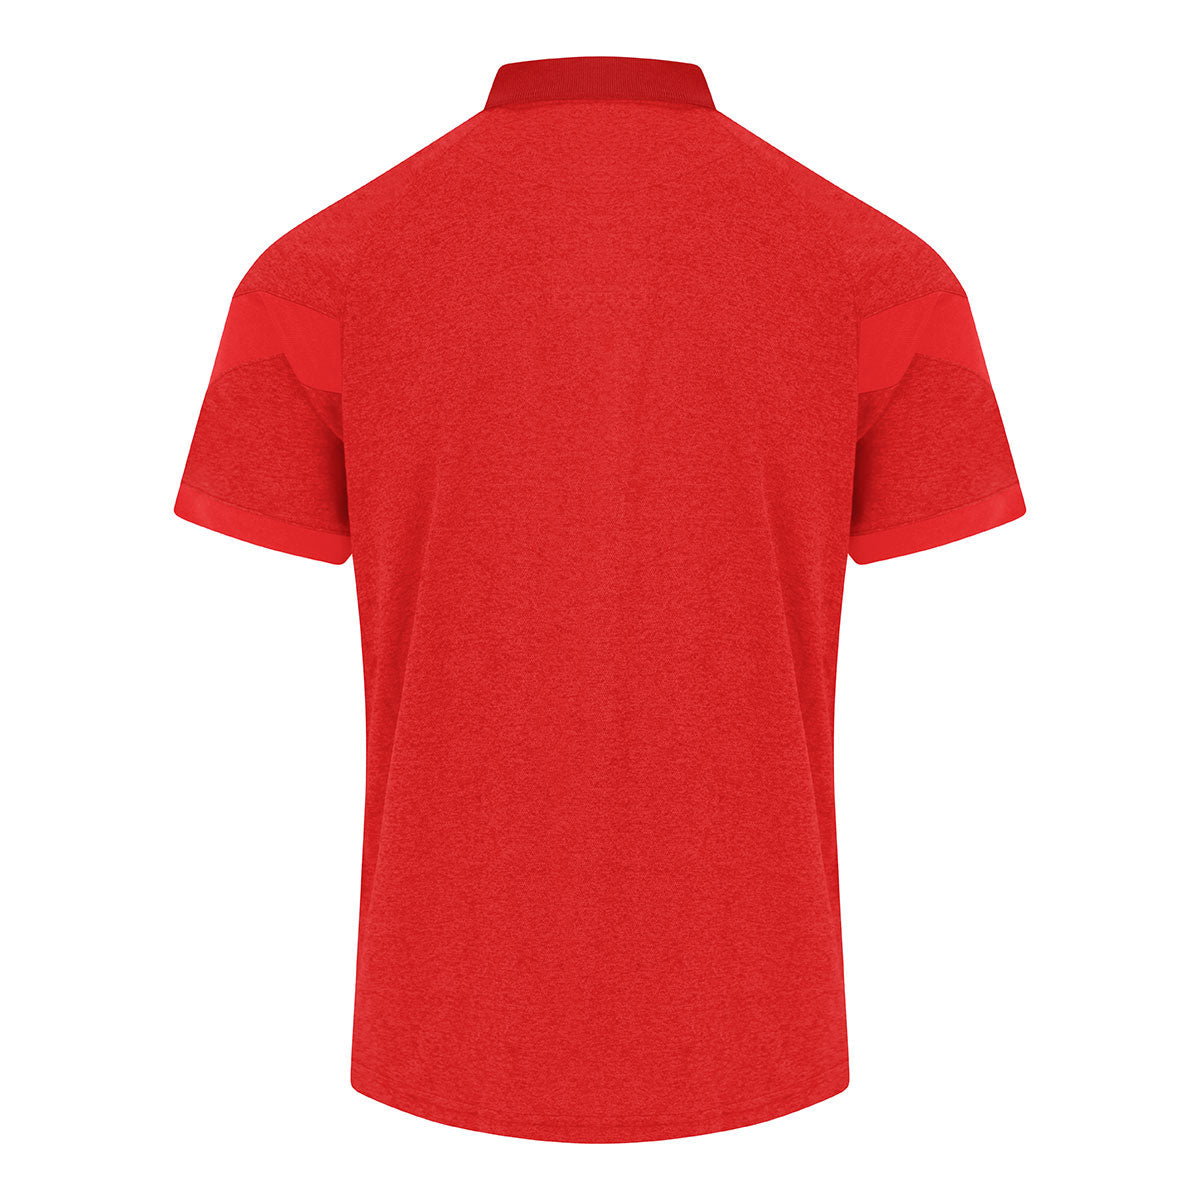 Mc Keever Ballinascarthy Camogie Core 22 Polo Top - Adult - Red